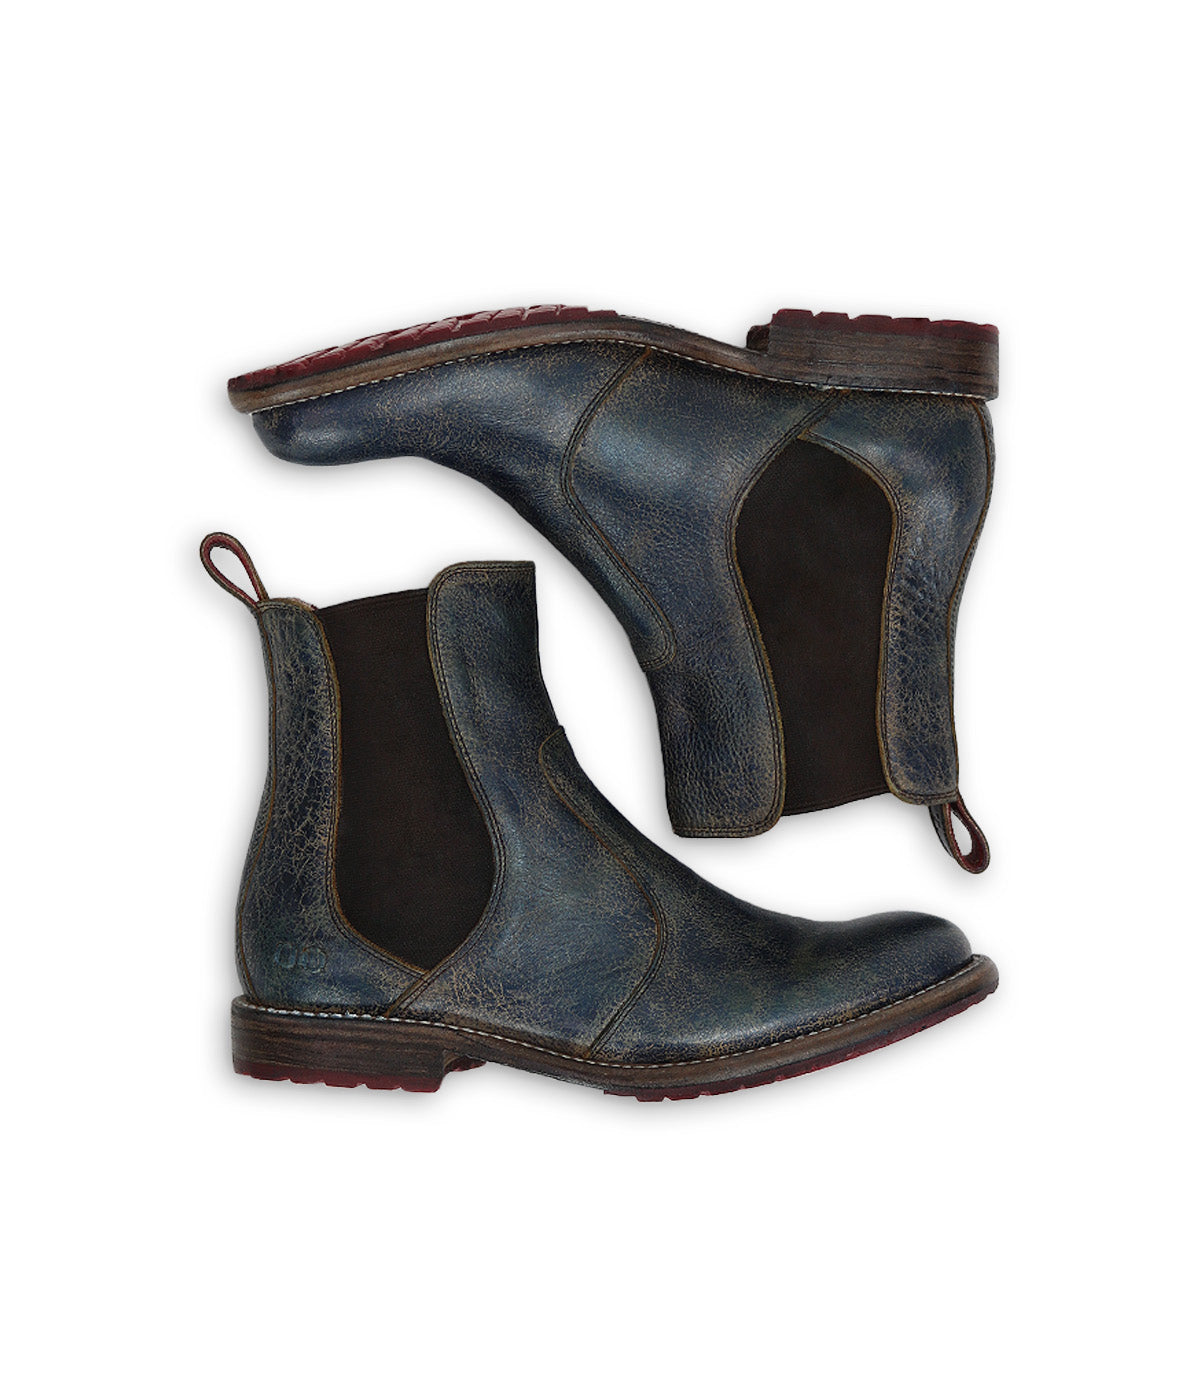 A pair of blue Nandi vegetable tanned leather chelsea boots.